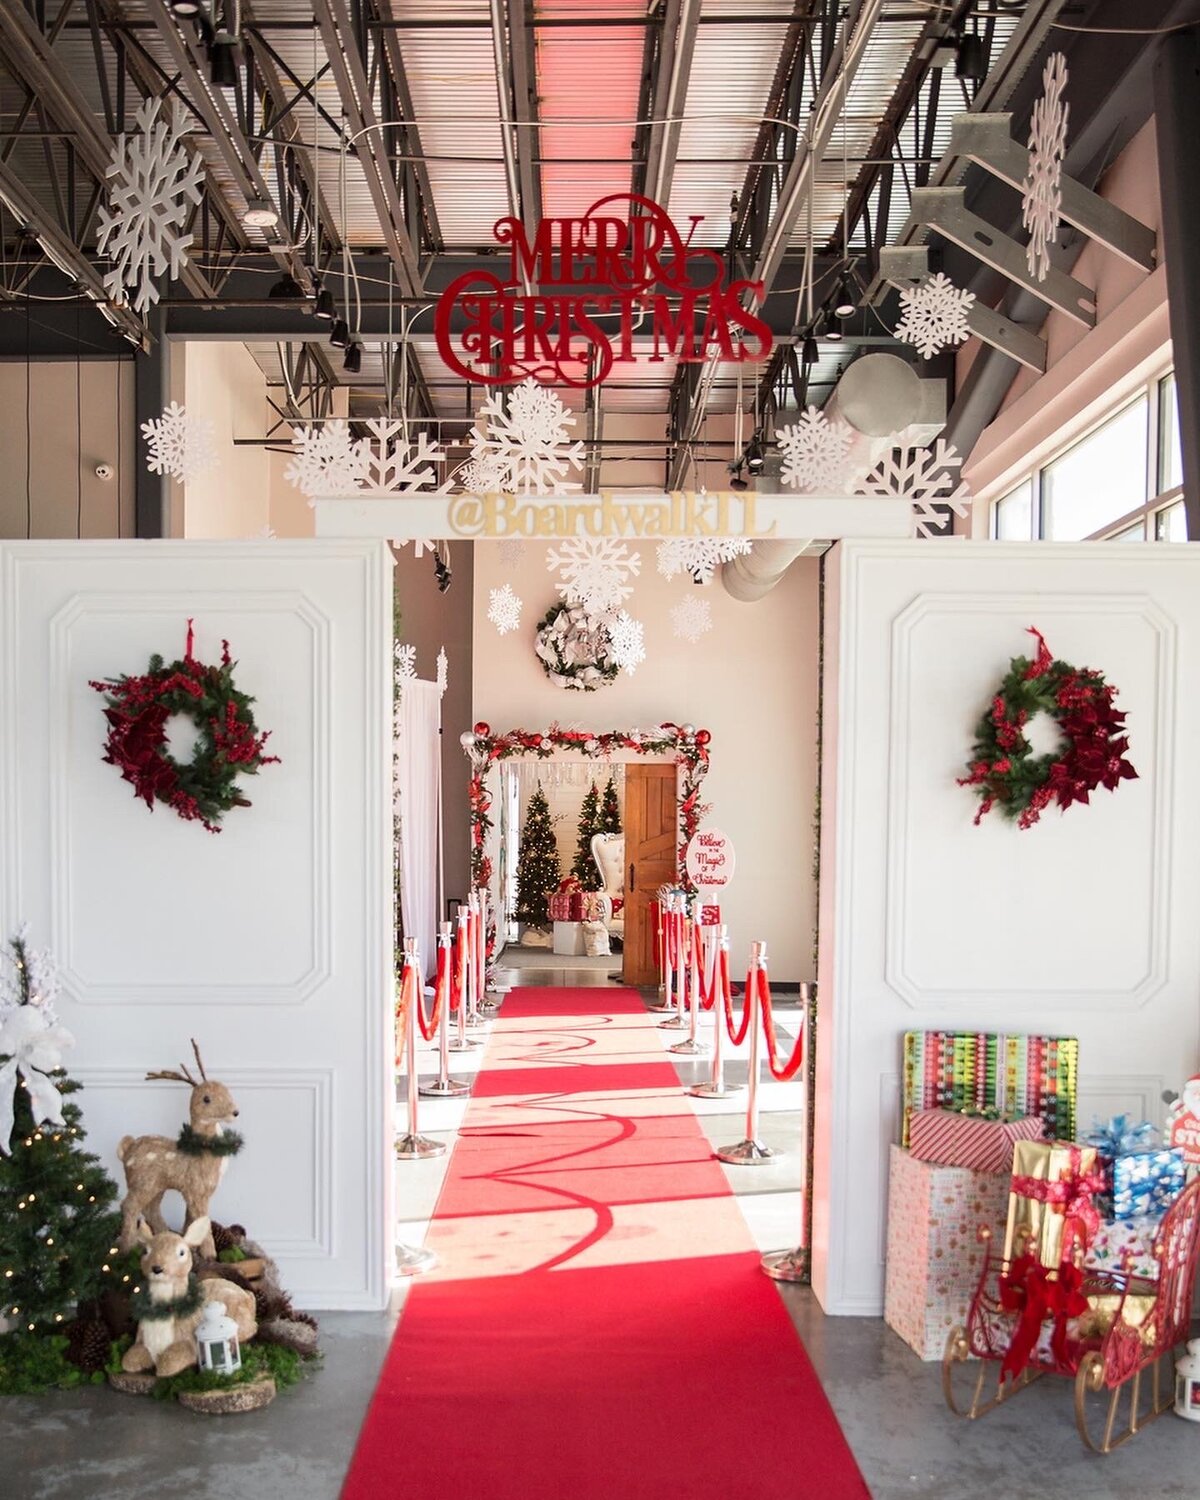 Holiday themed red carpet event display with white backdrops decorated with wreaths